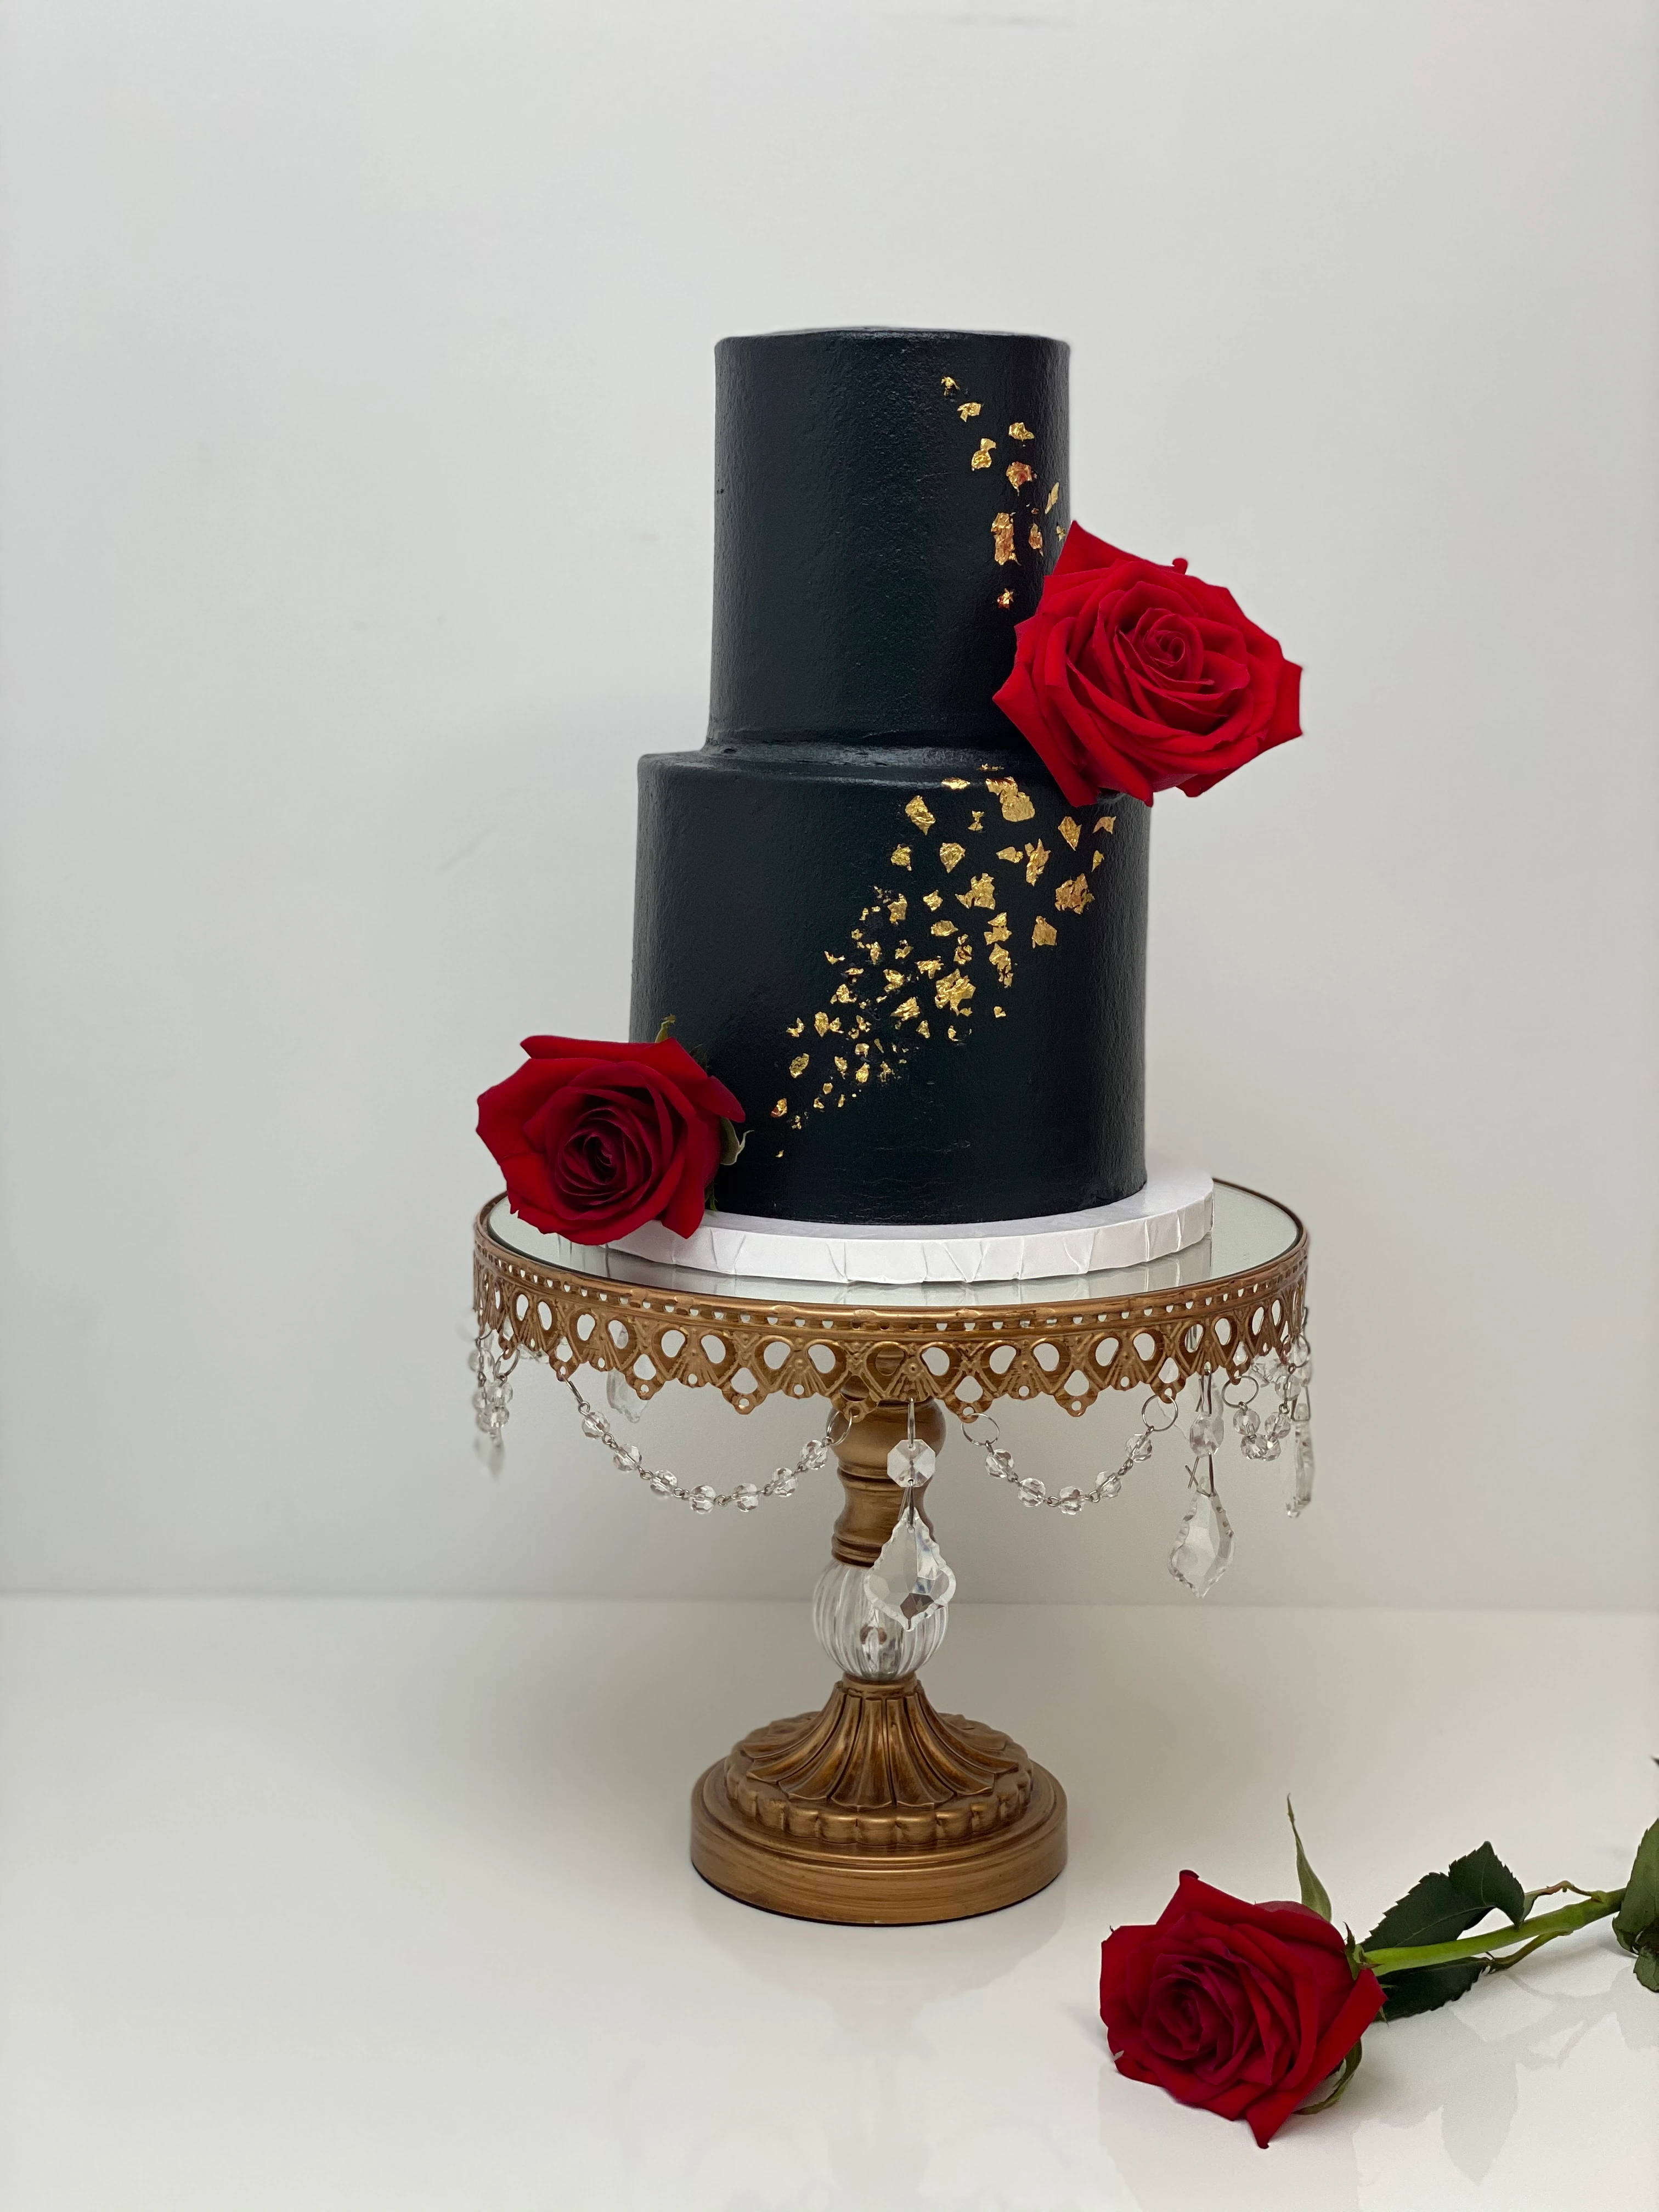 Black cake with 2 roses on a gold cake stand